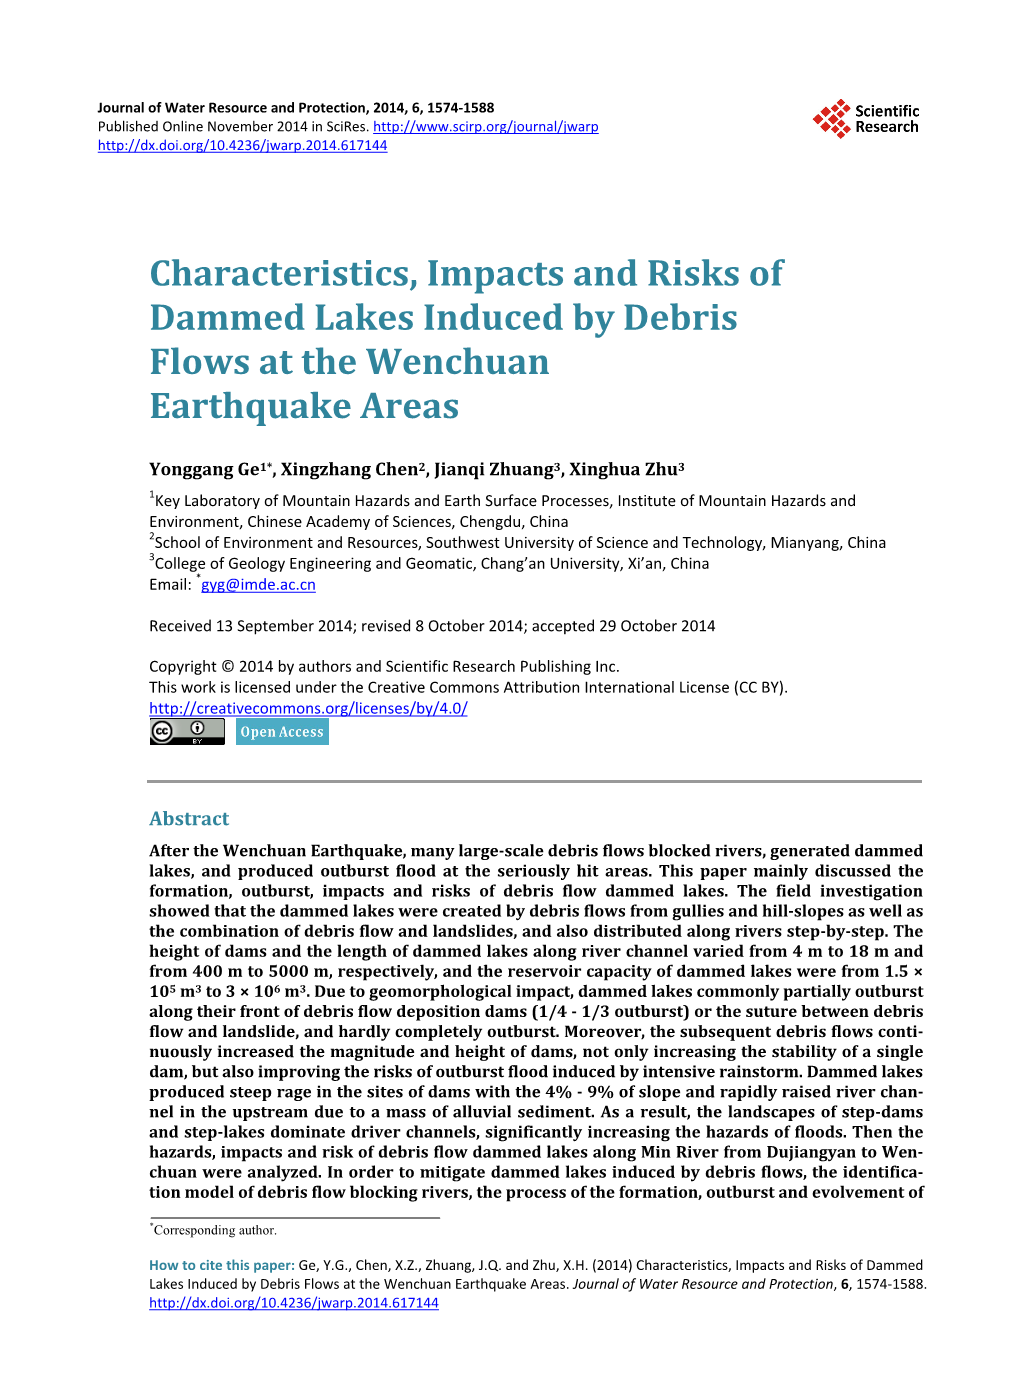 Characteristics, Impacts and Risks of Dammed Lakes Induced by Debris Flows at the Wenchuan Earthquake Areas